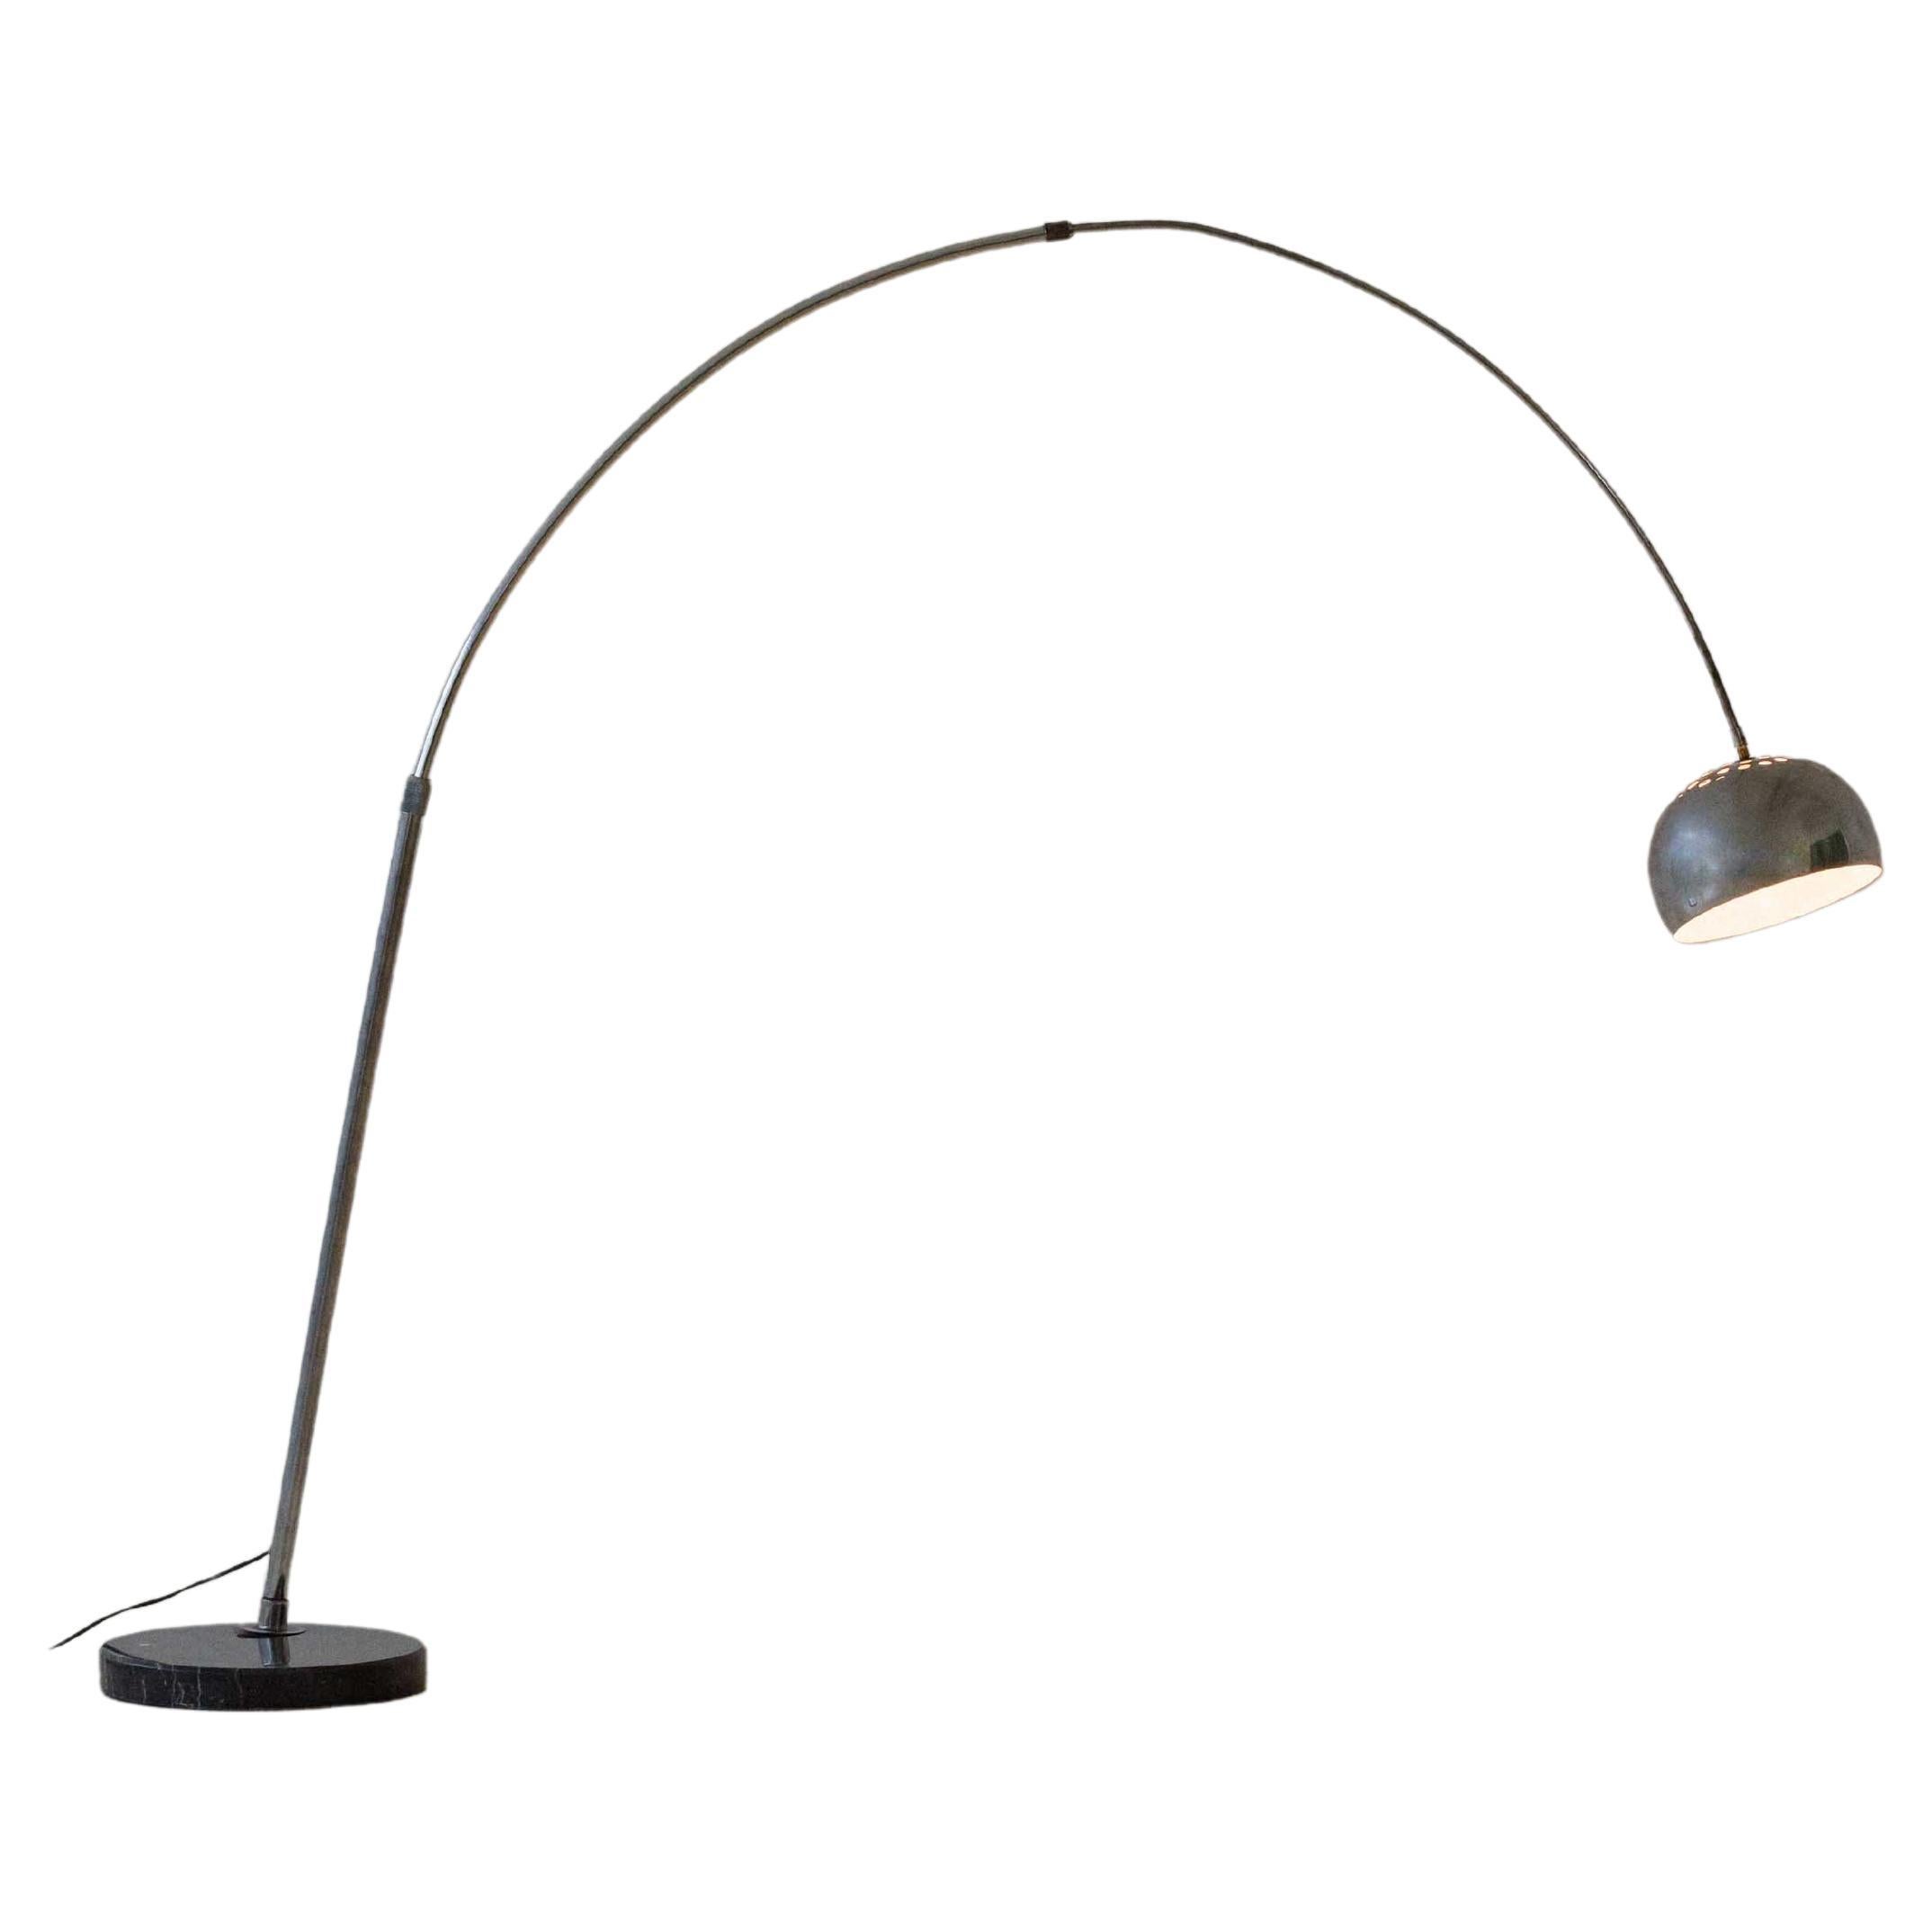 Floor Lamp, 1960s, Inspired by Achille & Pier Giacomo Castiglioni Iconic Arco